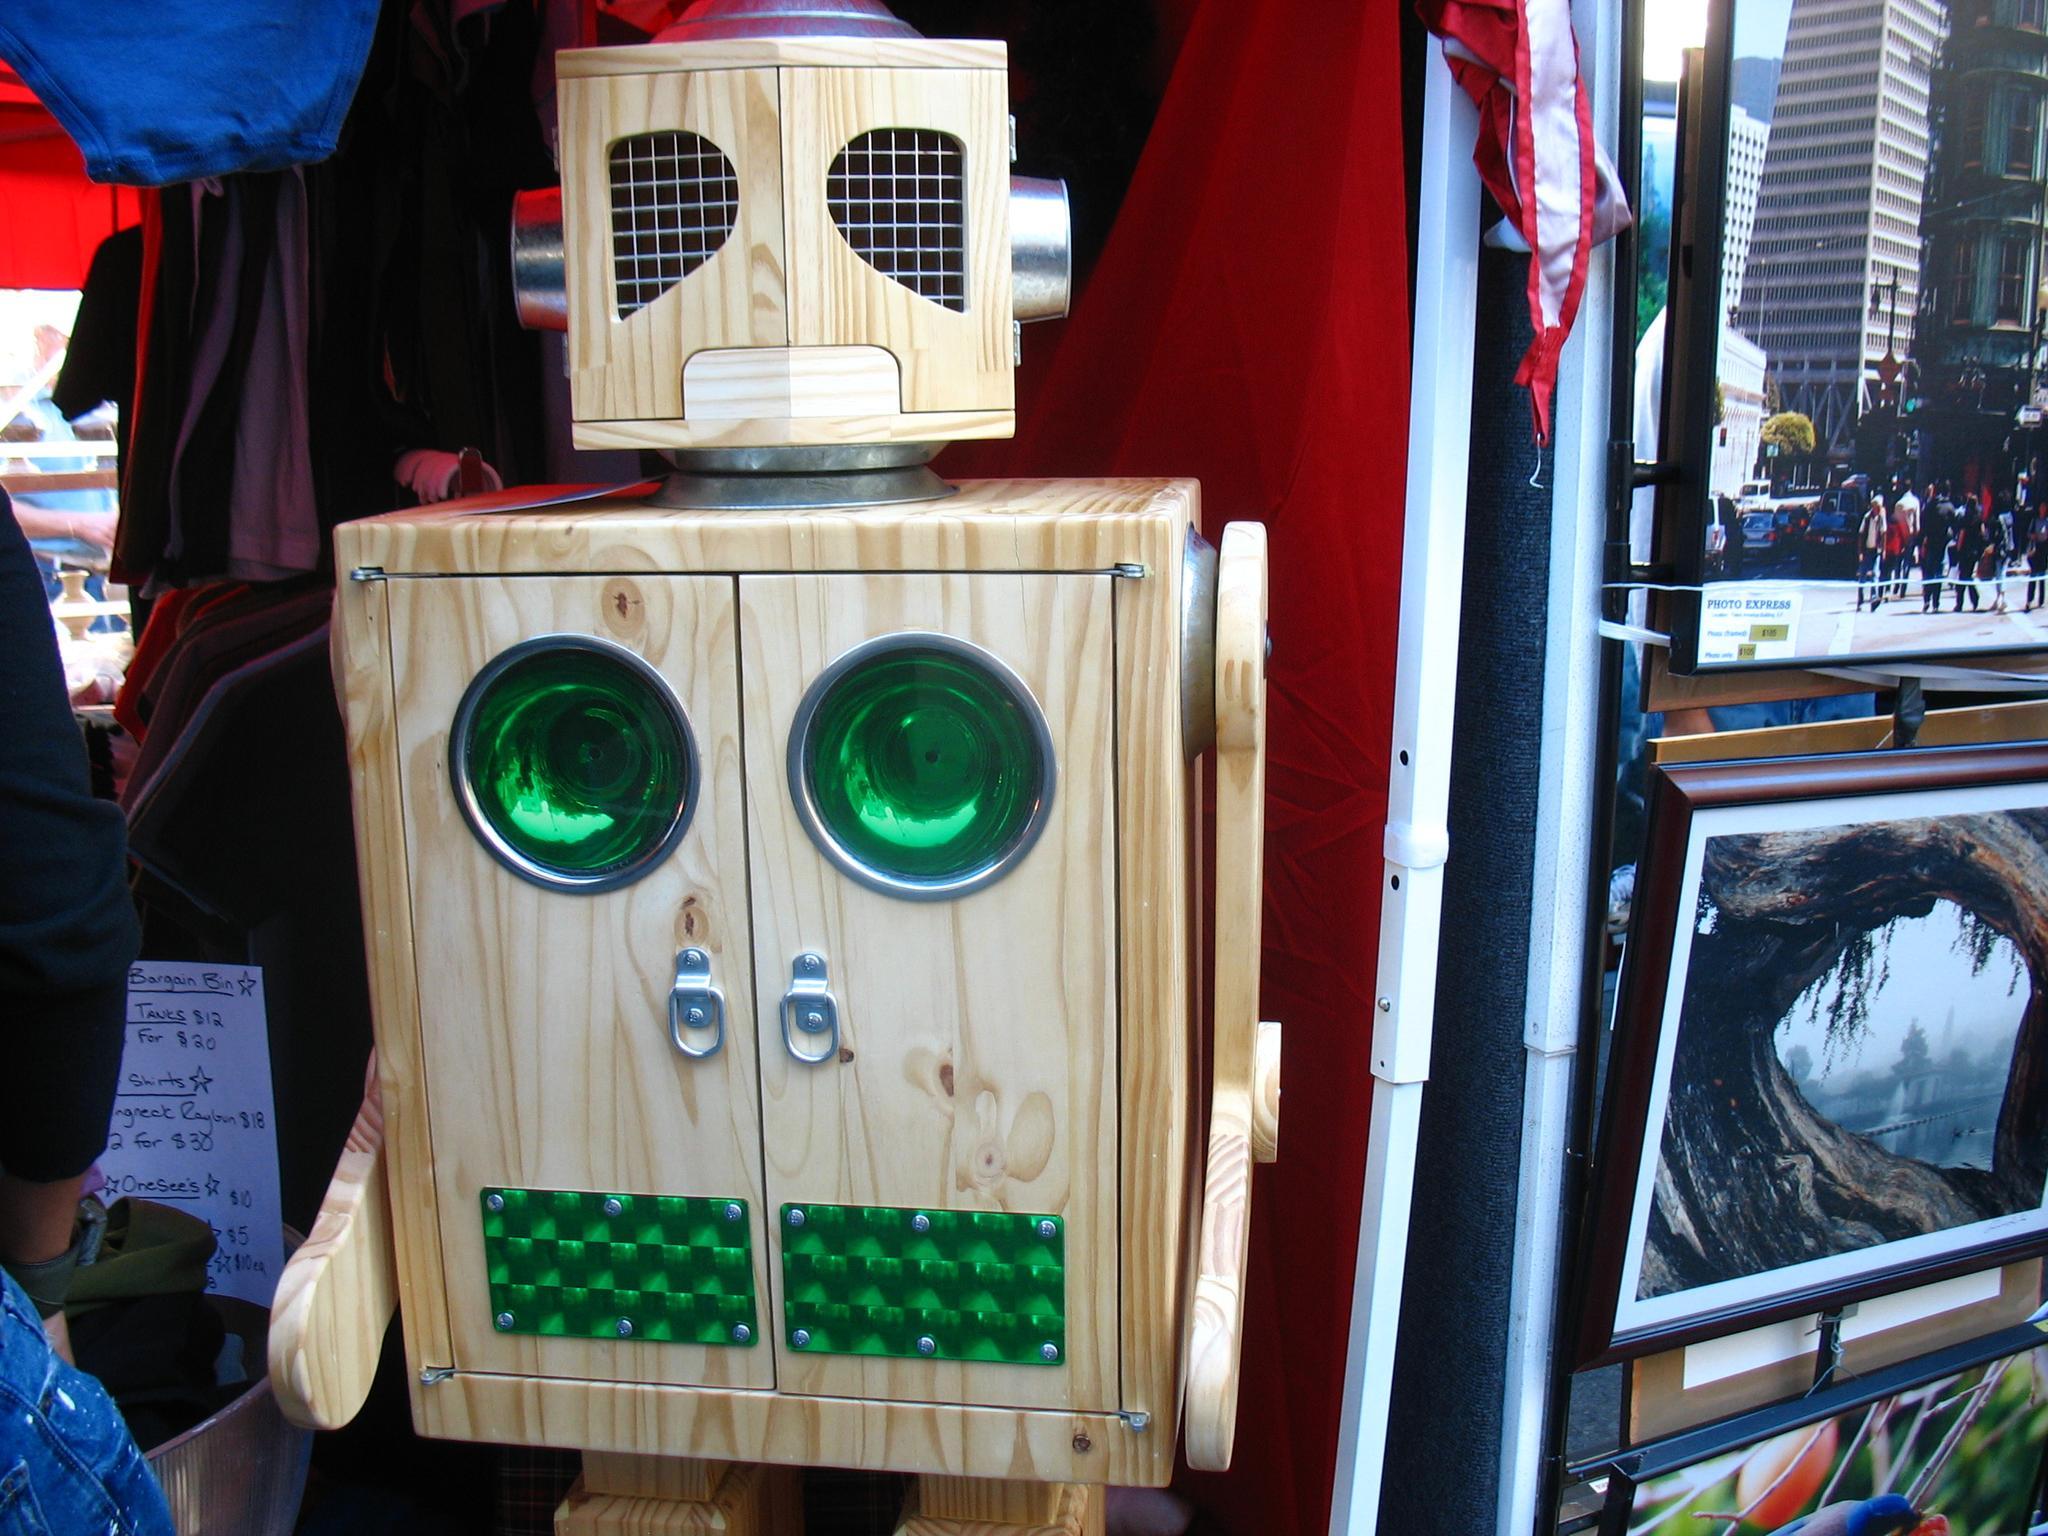 a wooden toy that is made to look like a robot